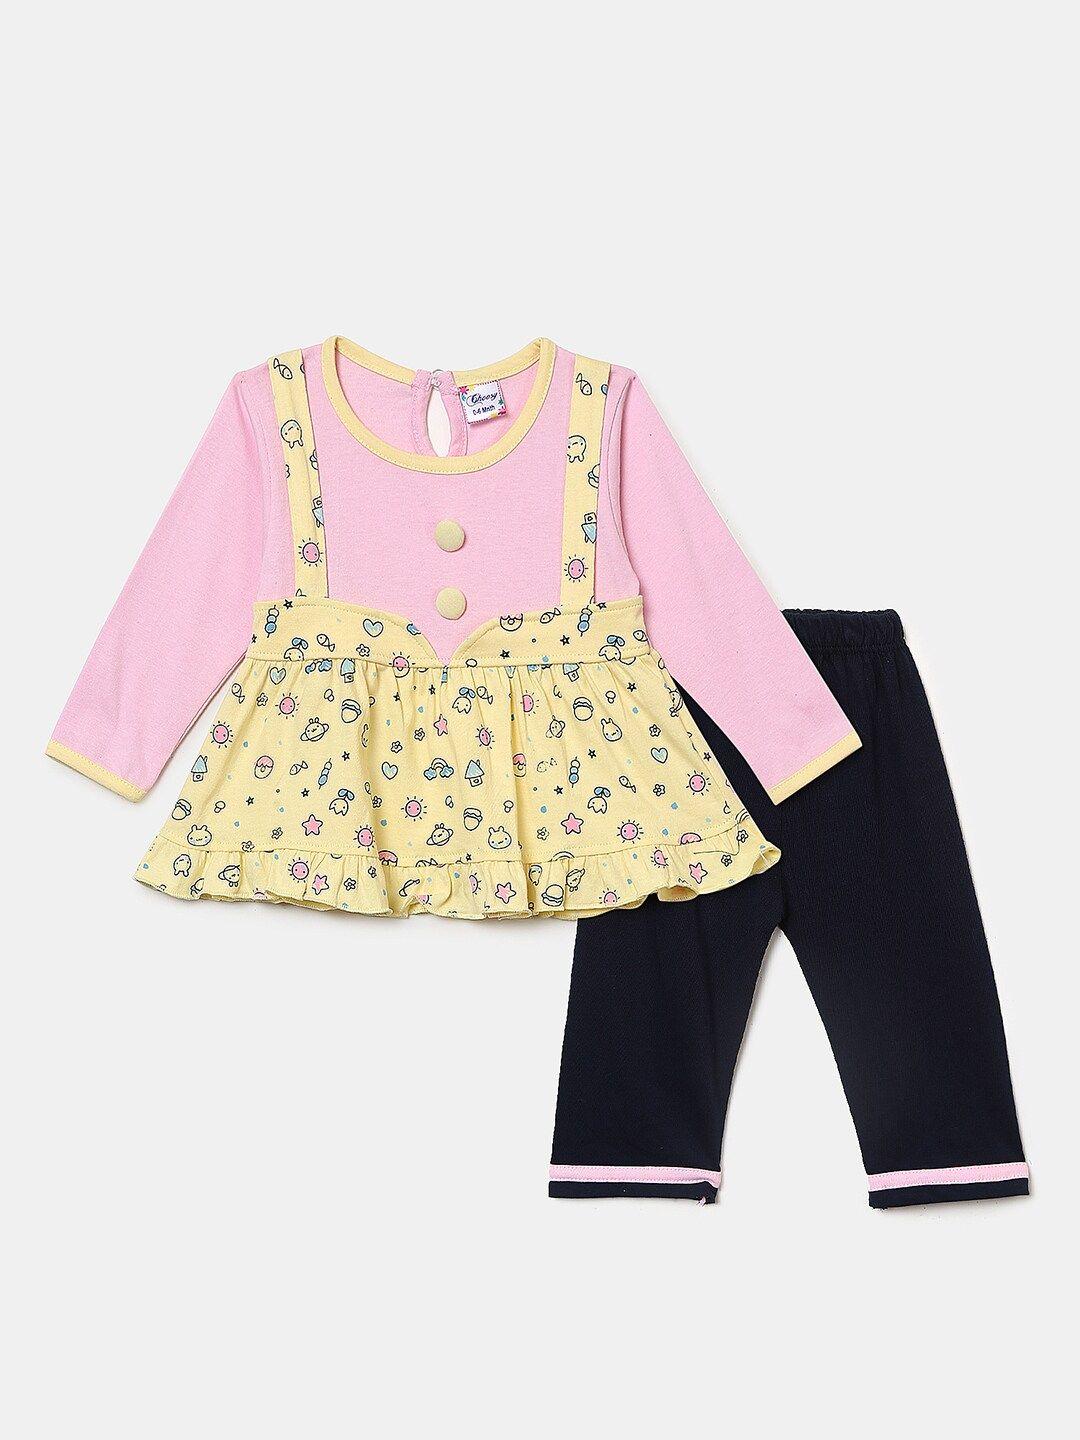 v-mart girls yellow & pink printed pure cotton top with pyjamas